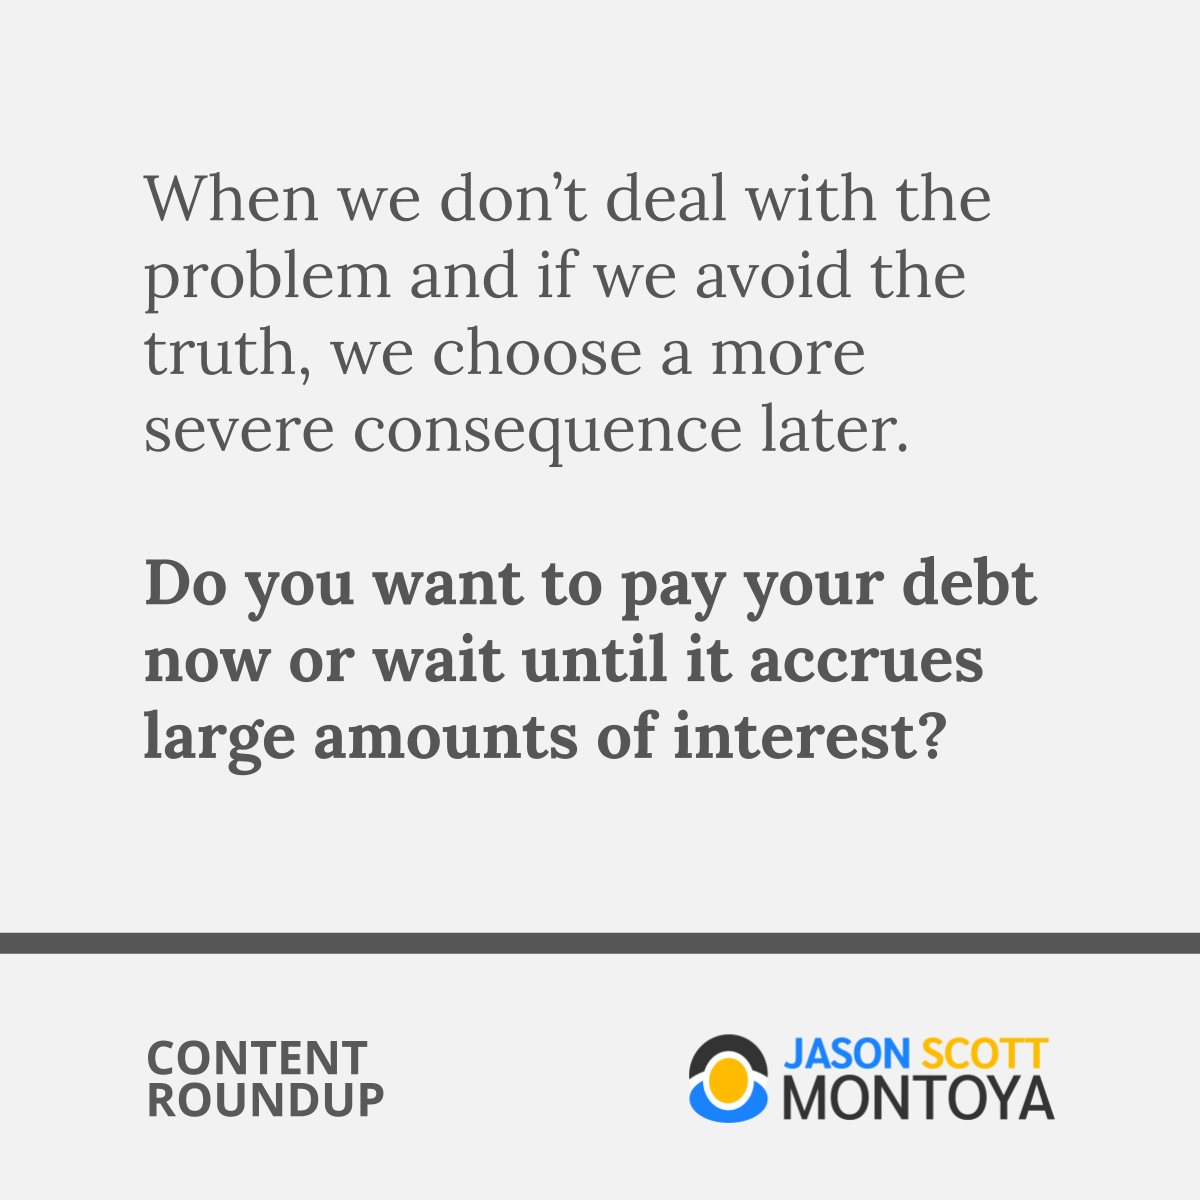 When we don’t deal with the problem and if we avoid the truth, we choose a more severe consequence later.   Do you want to pay your debt now or wait until it accrues large amounts of interest?